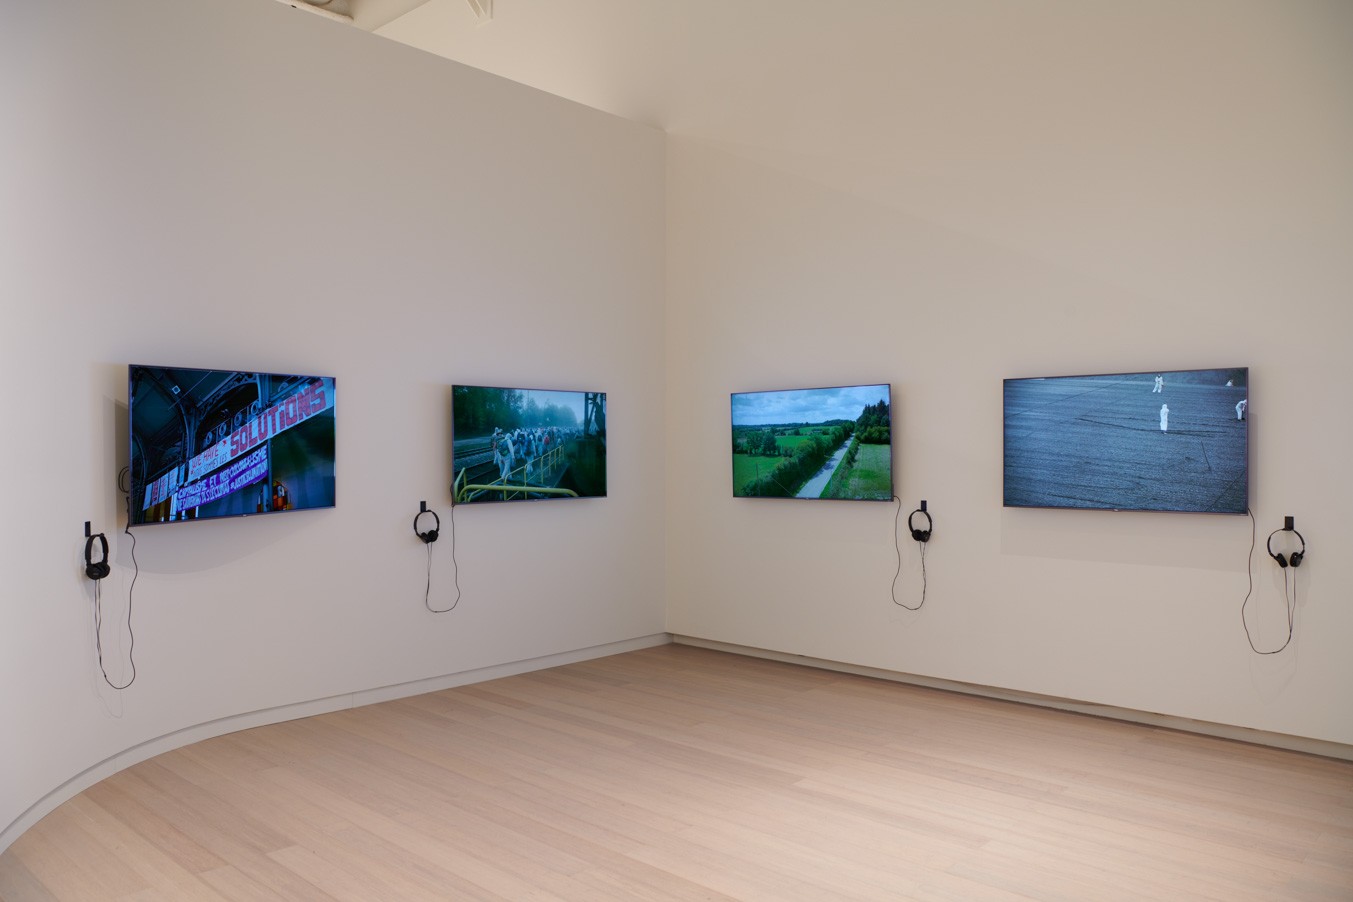 Installation view showing work by the artist Oliver Ressler from the exhibition “The Protest and The Recuperation” on view at the Wallach Art Gallery, Columbia University. Photograph by Kyle Knodell.